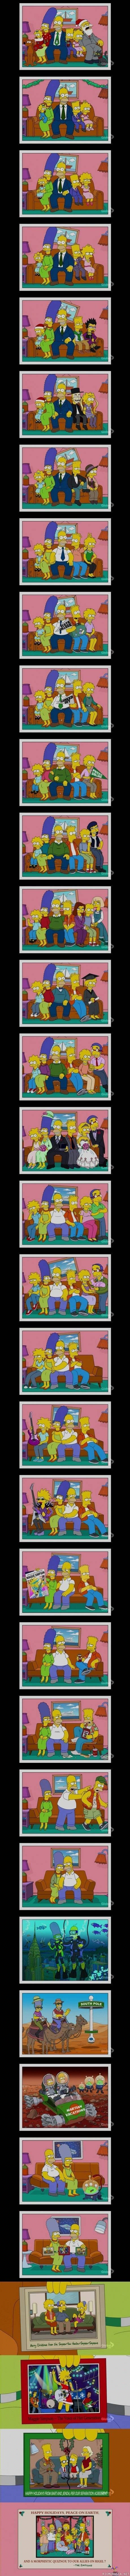 The Simpsons, All Grown Up